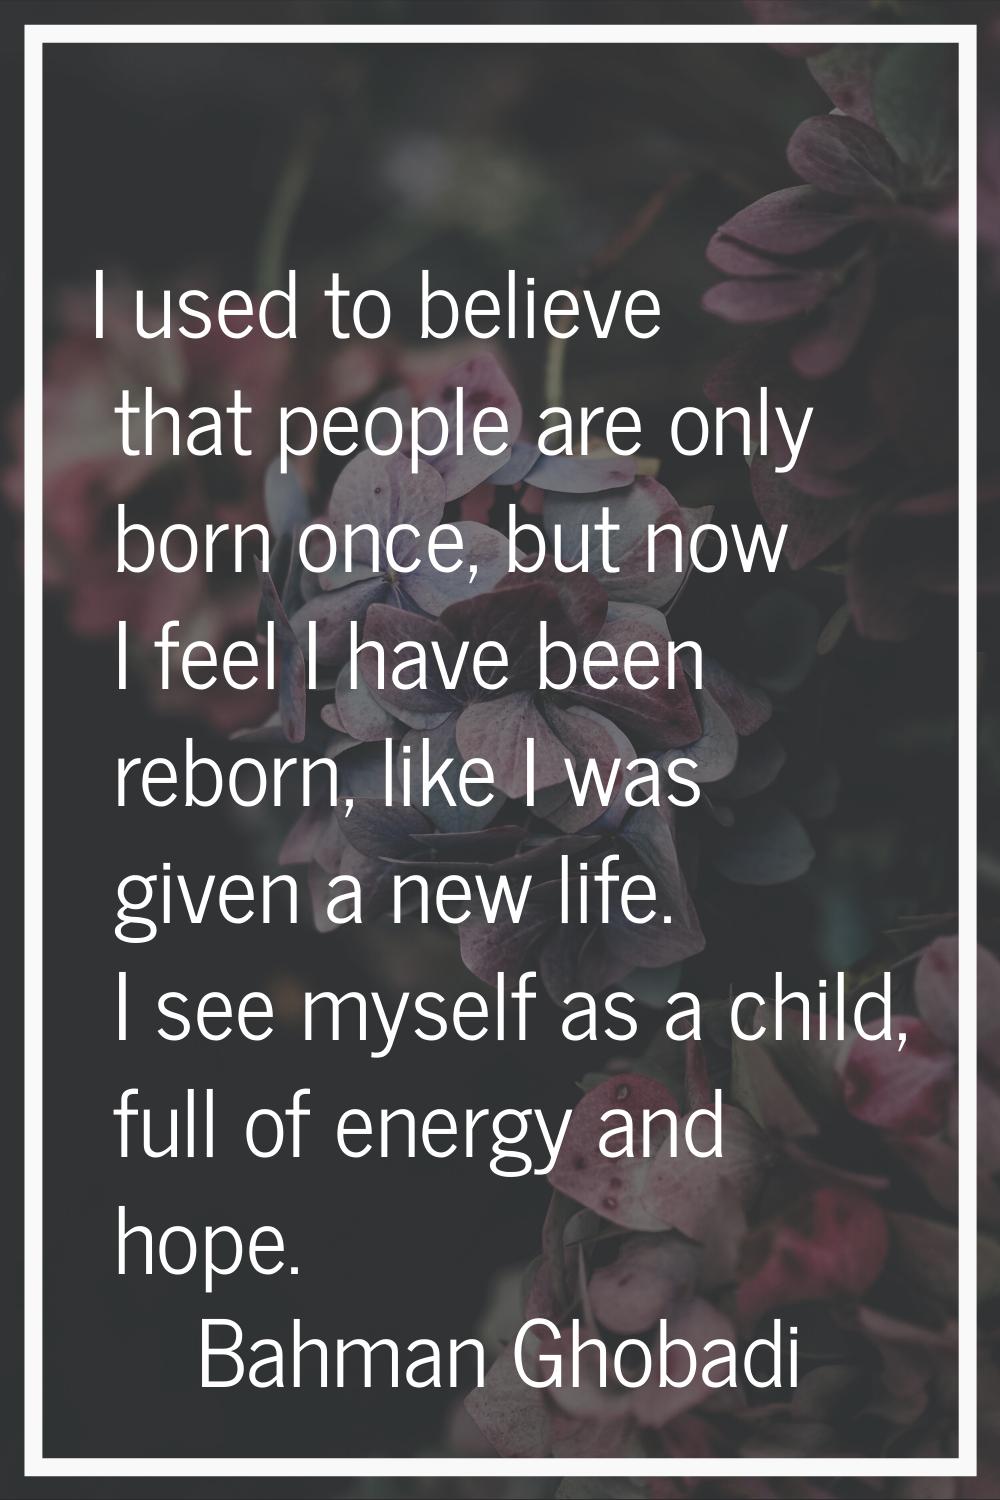 I used to believe that people are only born once, but now I feel I have been reborn, like I was giv